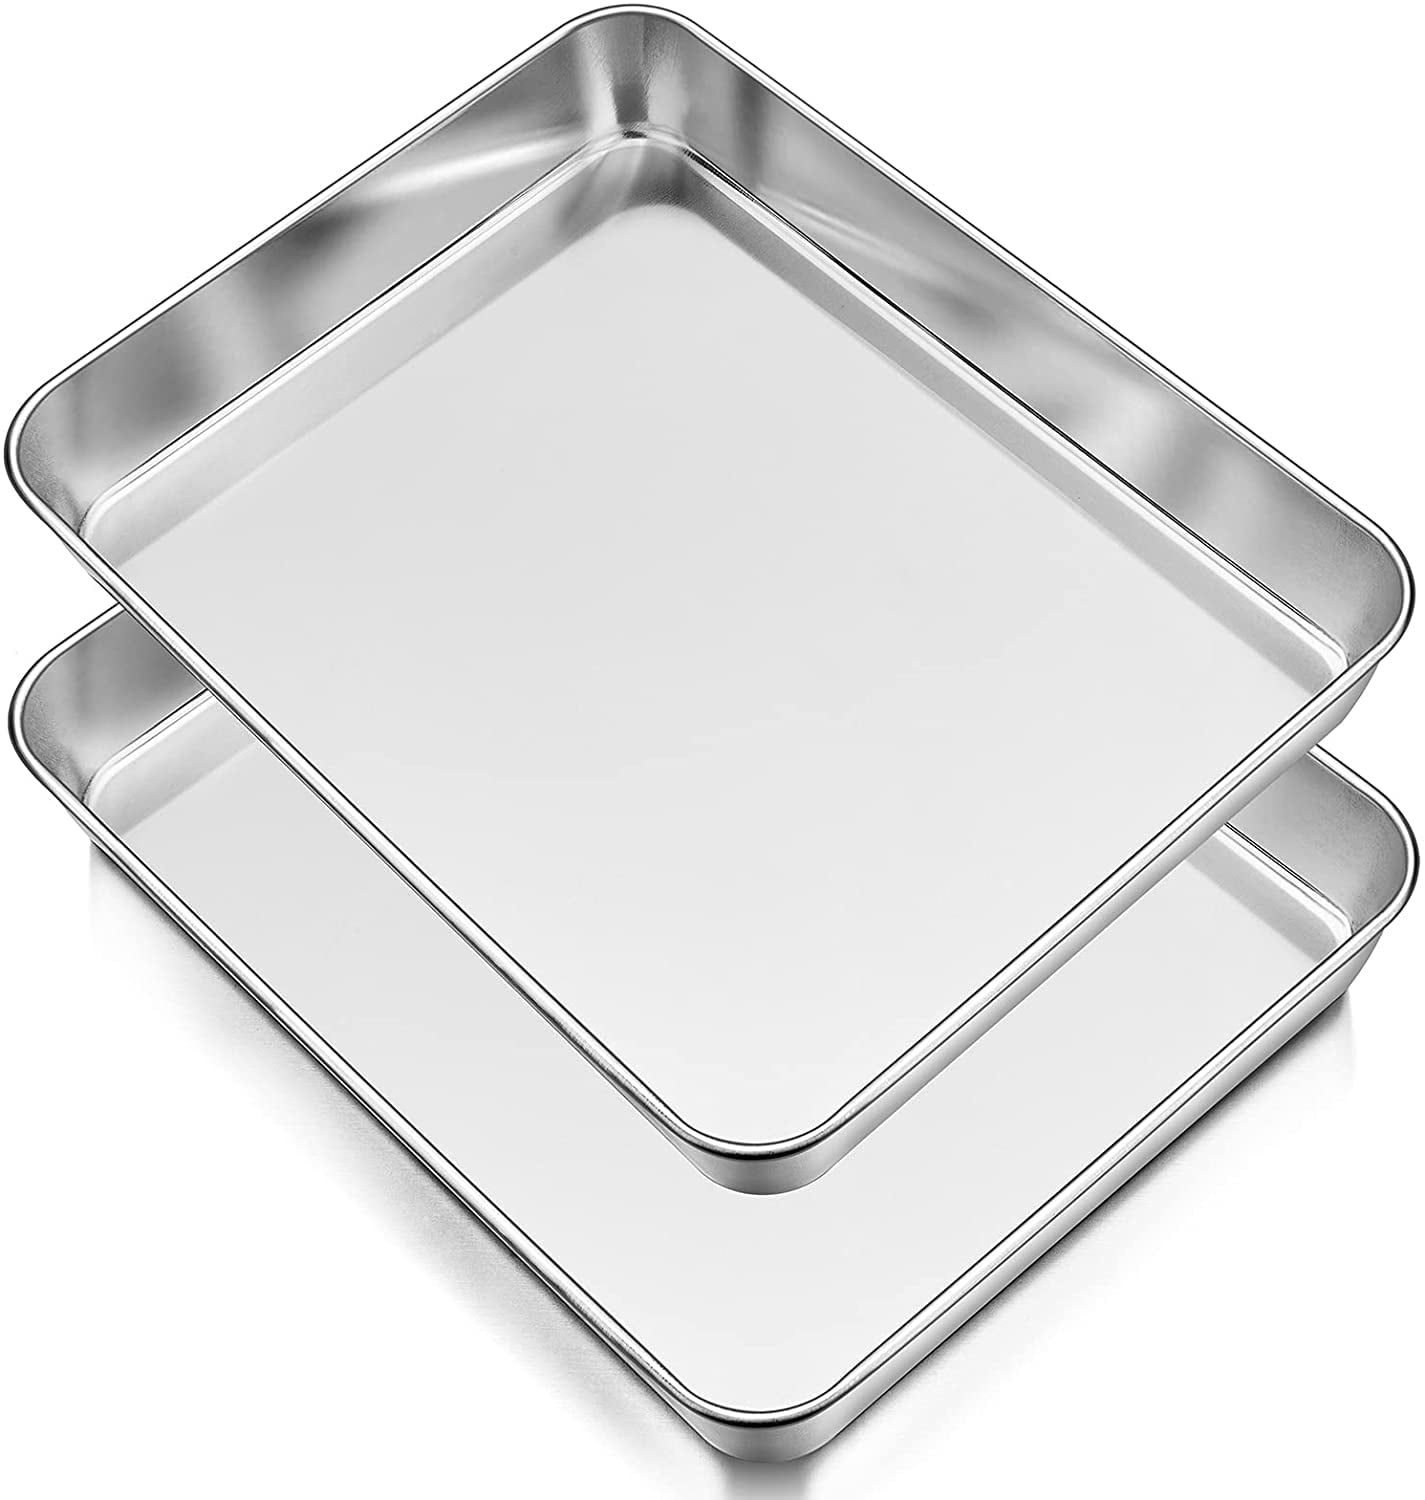  Professional Quarter Sheet Baking Pans - Aluminum Cookie Sheet  Set of 2 - Rimmed Baking Sheets for Baking and Roasting - Durable,  Oven-safe, Non-toxic, Easy to Clean, Commercial Quality - 9x13-inch